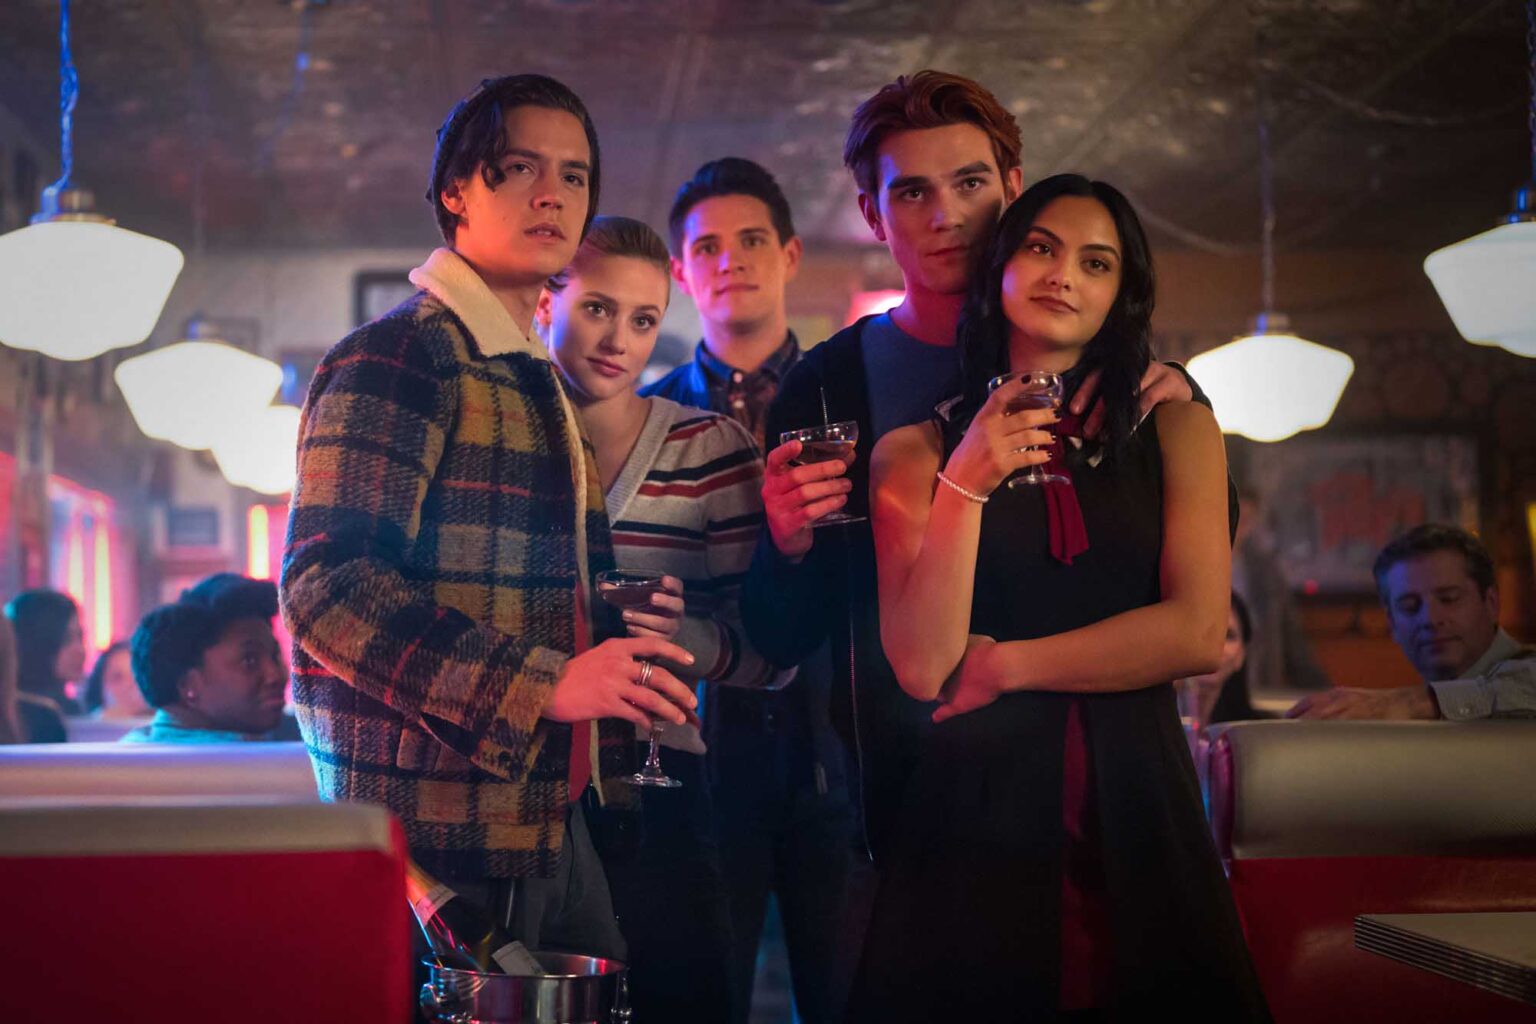 Ready for 'Riverdale' to return for season 5? Celebrate the show's return in January with the best memes from the previous four seasons.